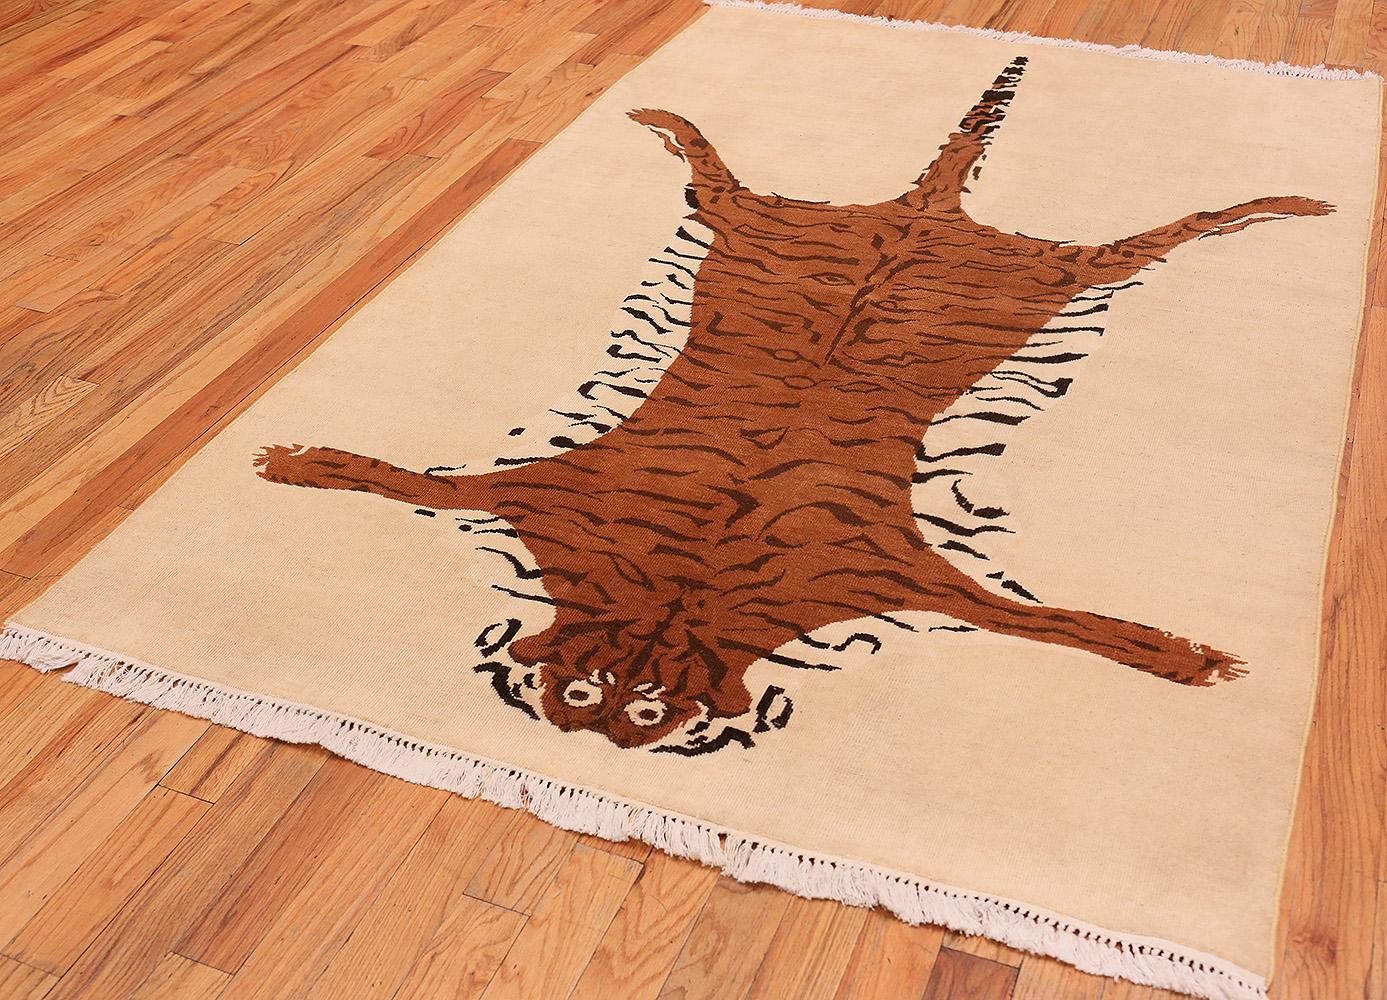 A beautiful and extremely artistic vintage tiger design rug, country of origin / rug type: Indian rugs, vintage, circa late 20th century. Size: 5 ft 4 in x 8 ft (1.63 m x 2.44 m)

This marvelous, highly unique vintage rug from the mid 20th century